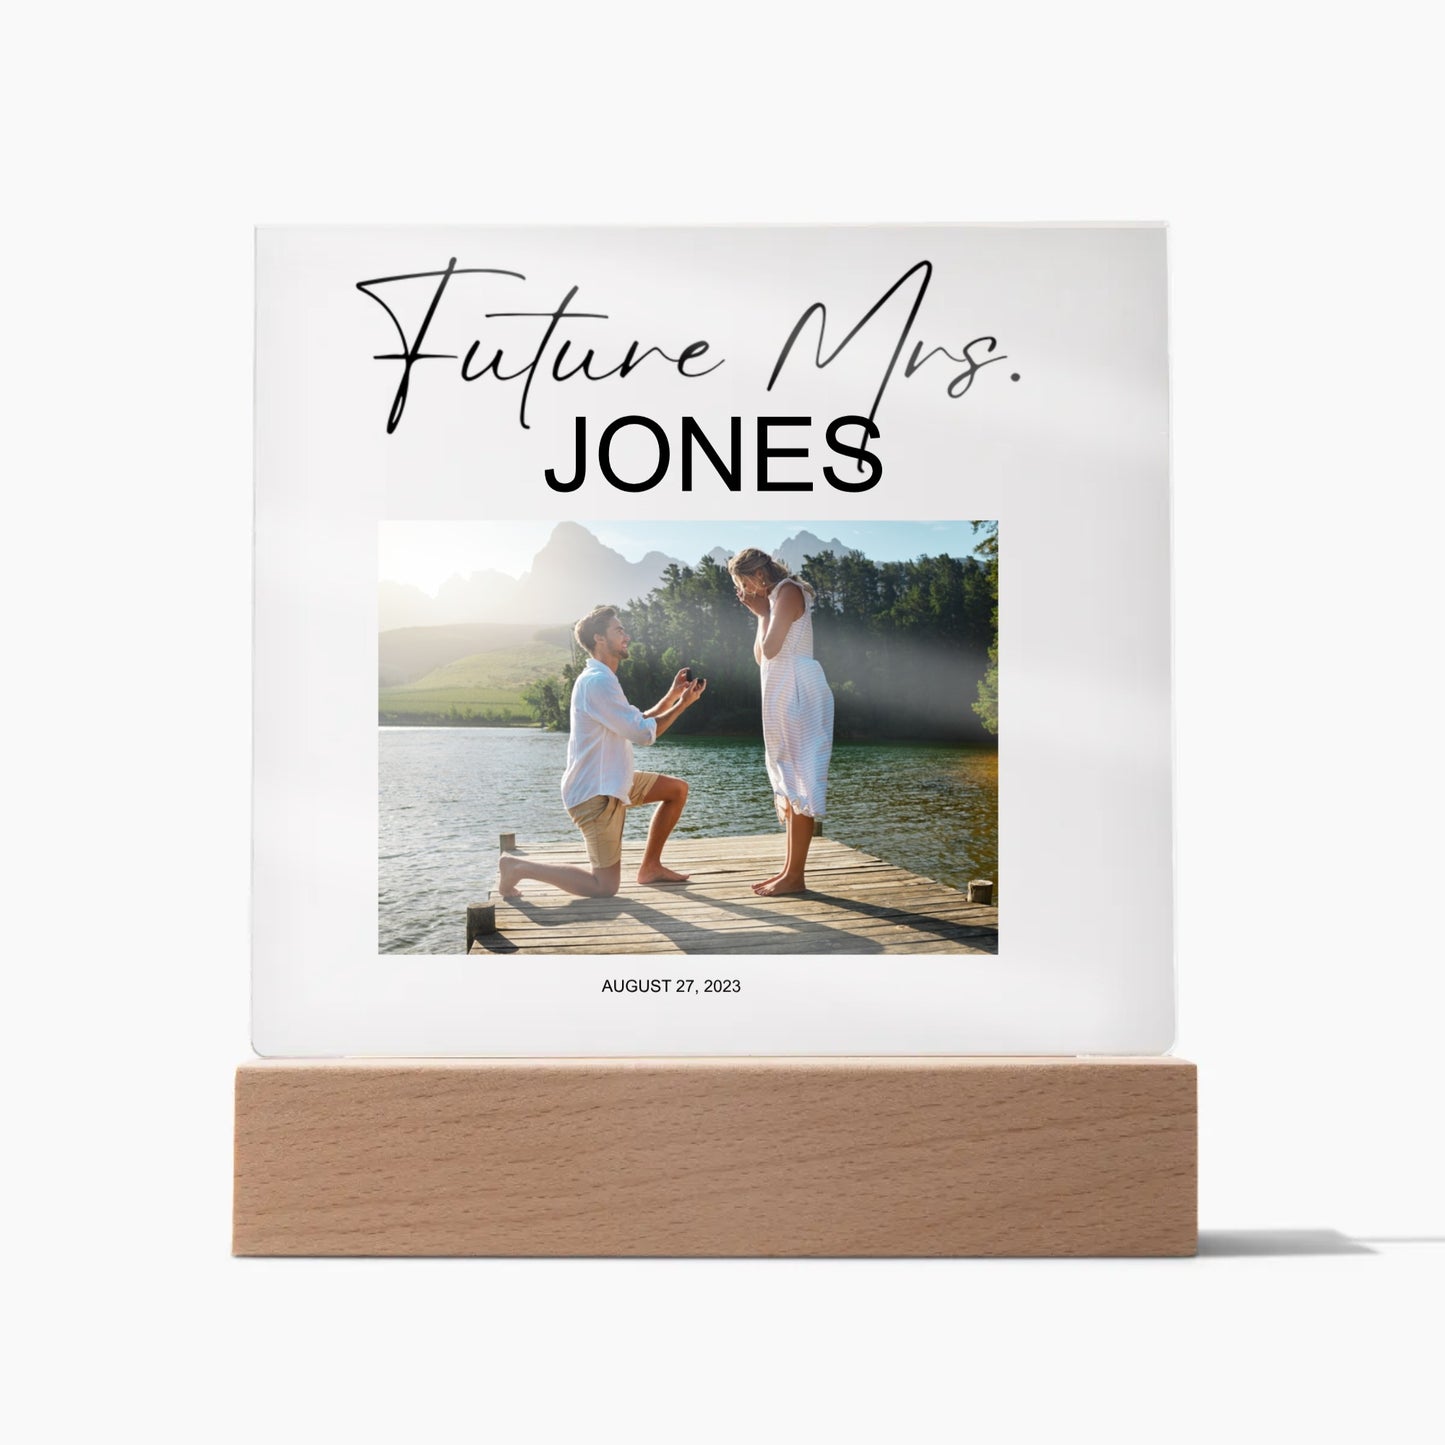 Future Mrs. Custom Engagement Gift – Acrylic Plaque, Wedding Sign, Engagement Gift for the Bride, Best Friend Getting Married, Personalized